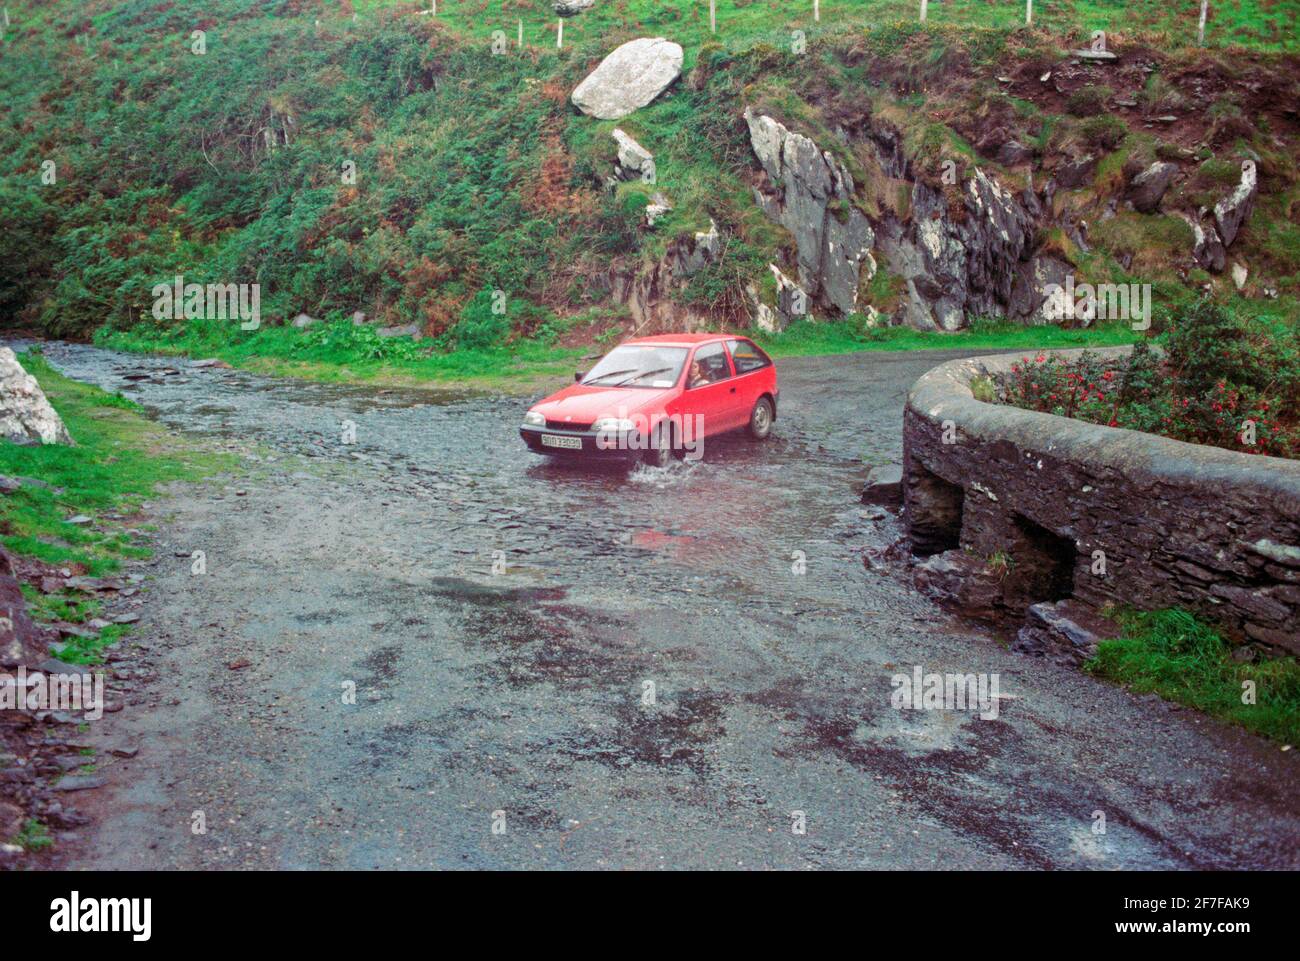 a car going through a stram that is flowing across a road, September 1990, Dingle Peninsula, Co. Kerry, Ireland Stock Photo